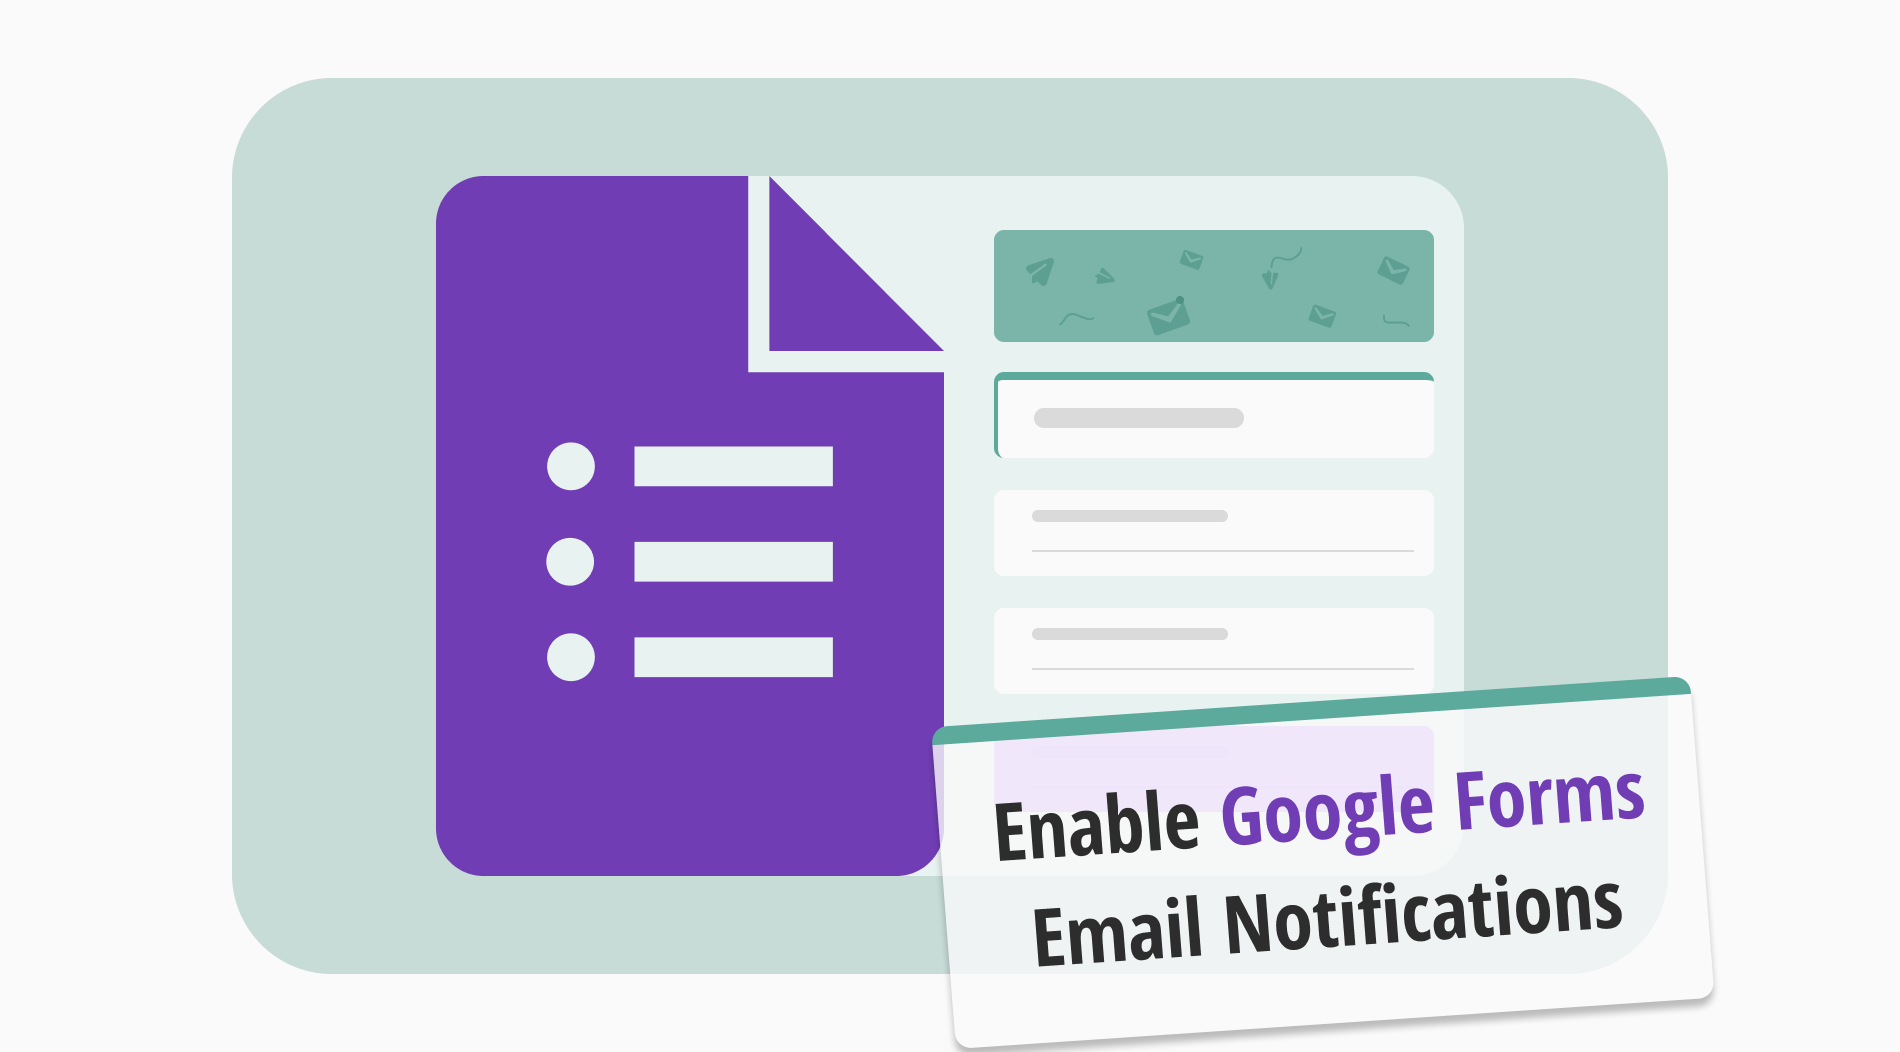 How to enable Google Forms email notifications